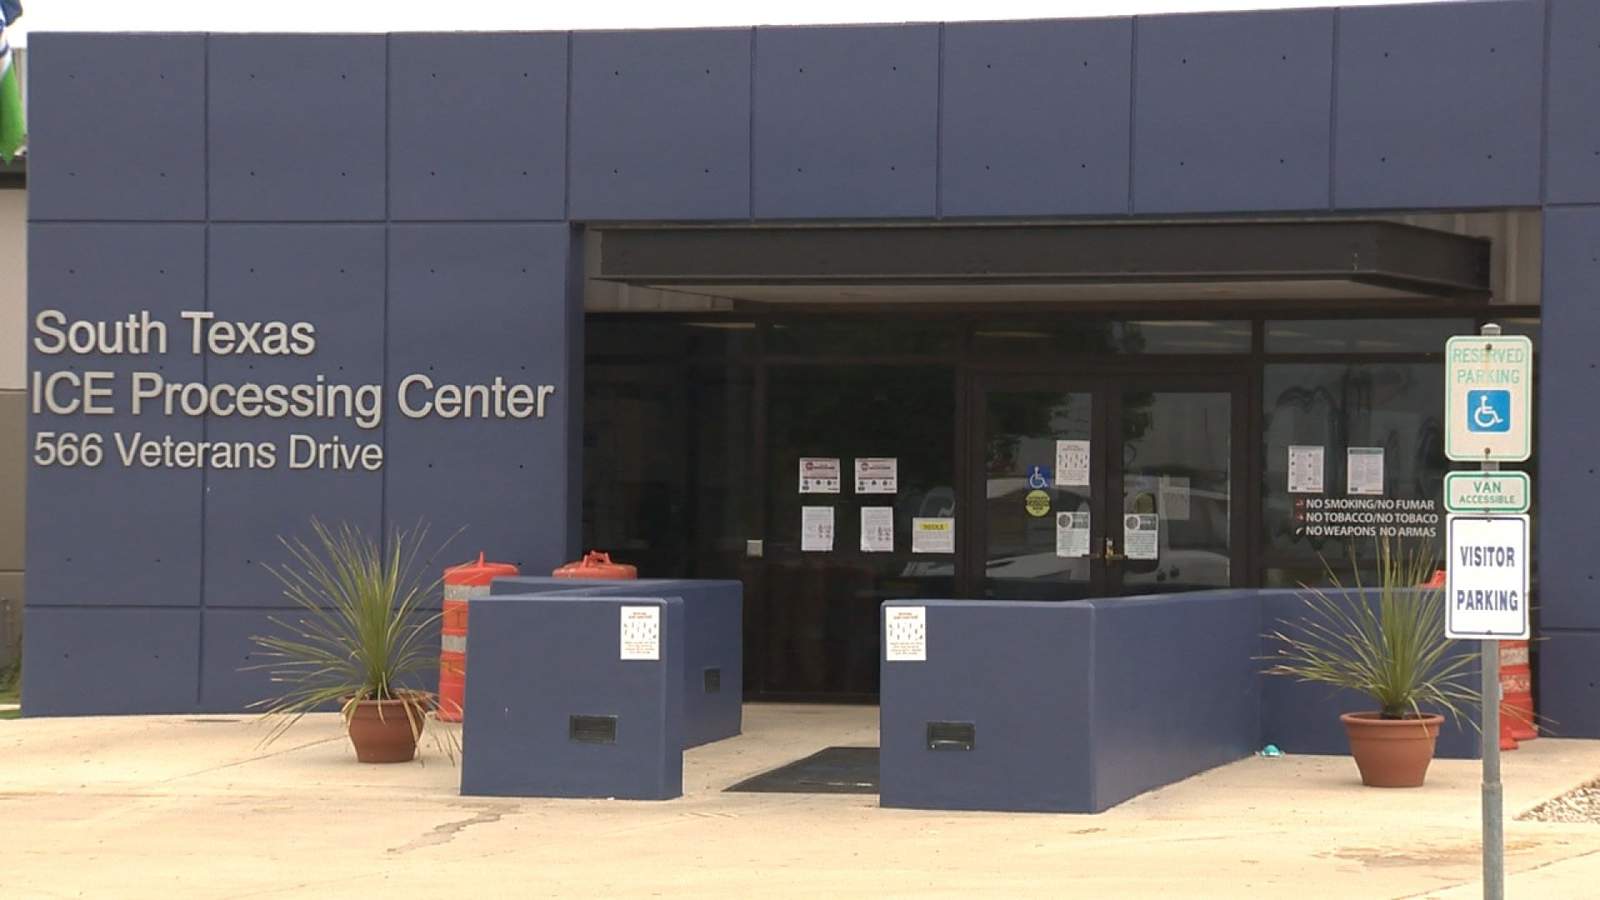 Every positive COVID-19 case in Pearsall traced to immigration detention center, officials say